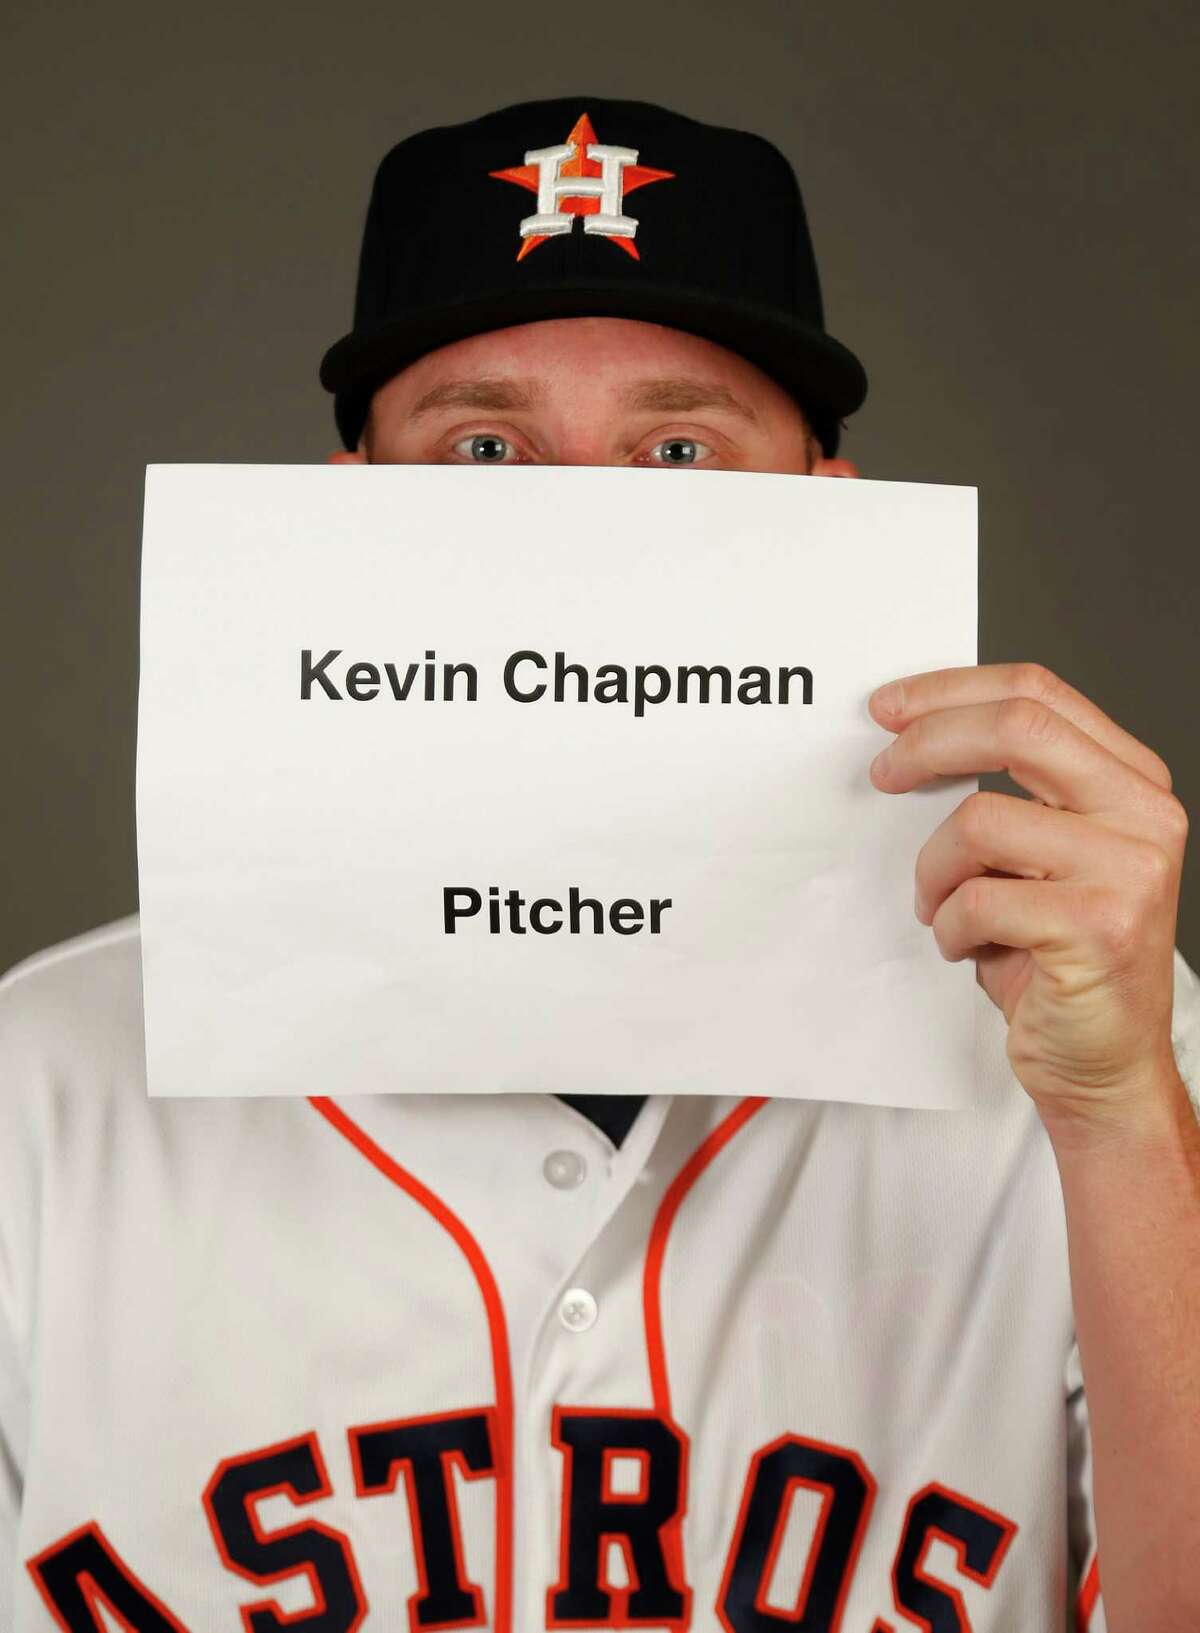 Houston Astros pitcher Kevin Chapman poses for a head shot during photo day at the Astros spring training in Kissimmee, Florida, Wednesday, Feb. 24, 2016.